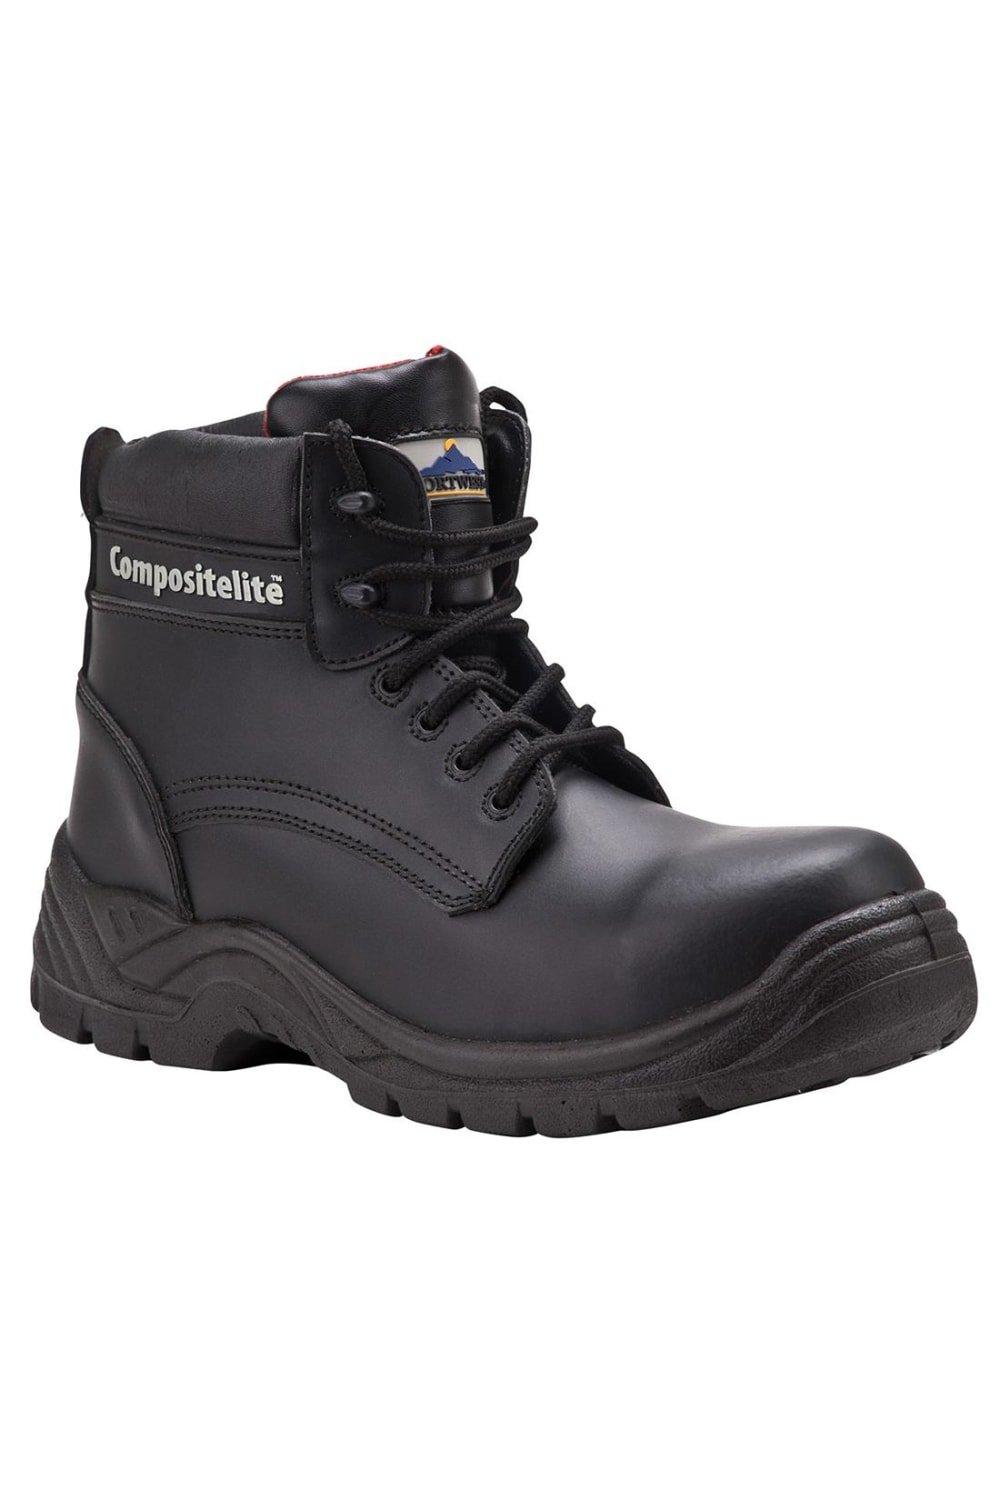 Thor Leather Compositelite Safety Boots